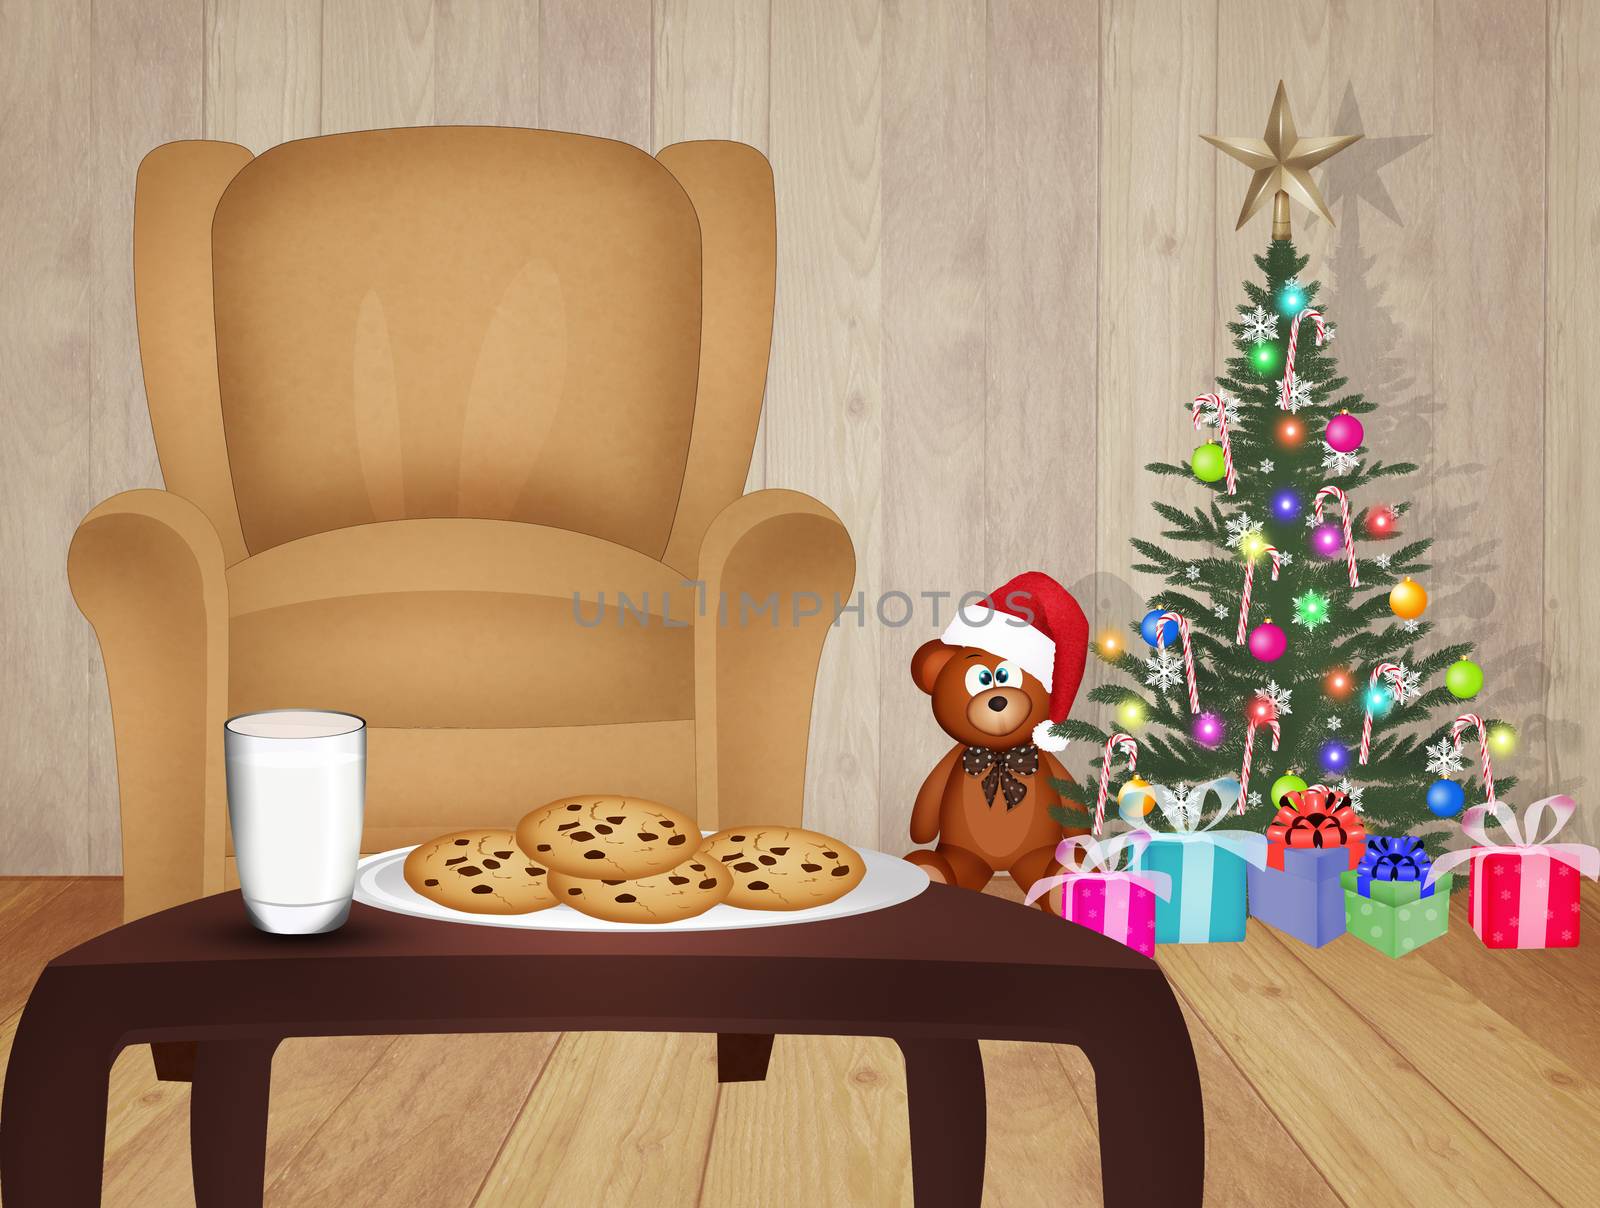 illustration of cookies and milk for Santa Claus